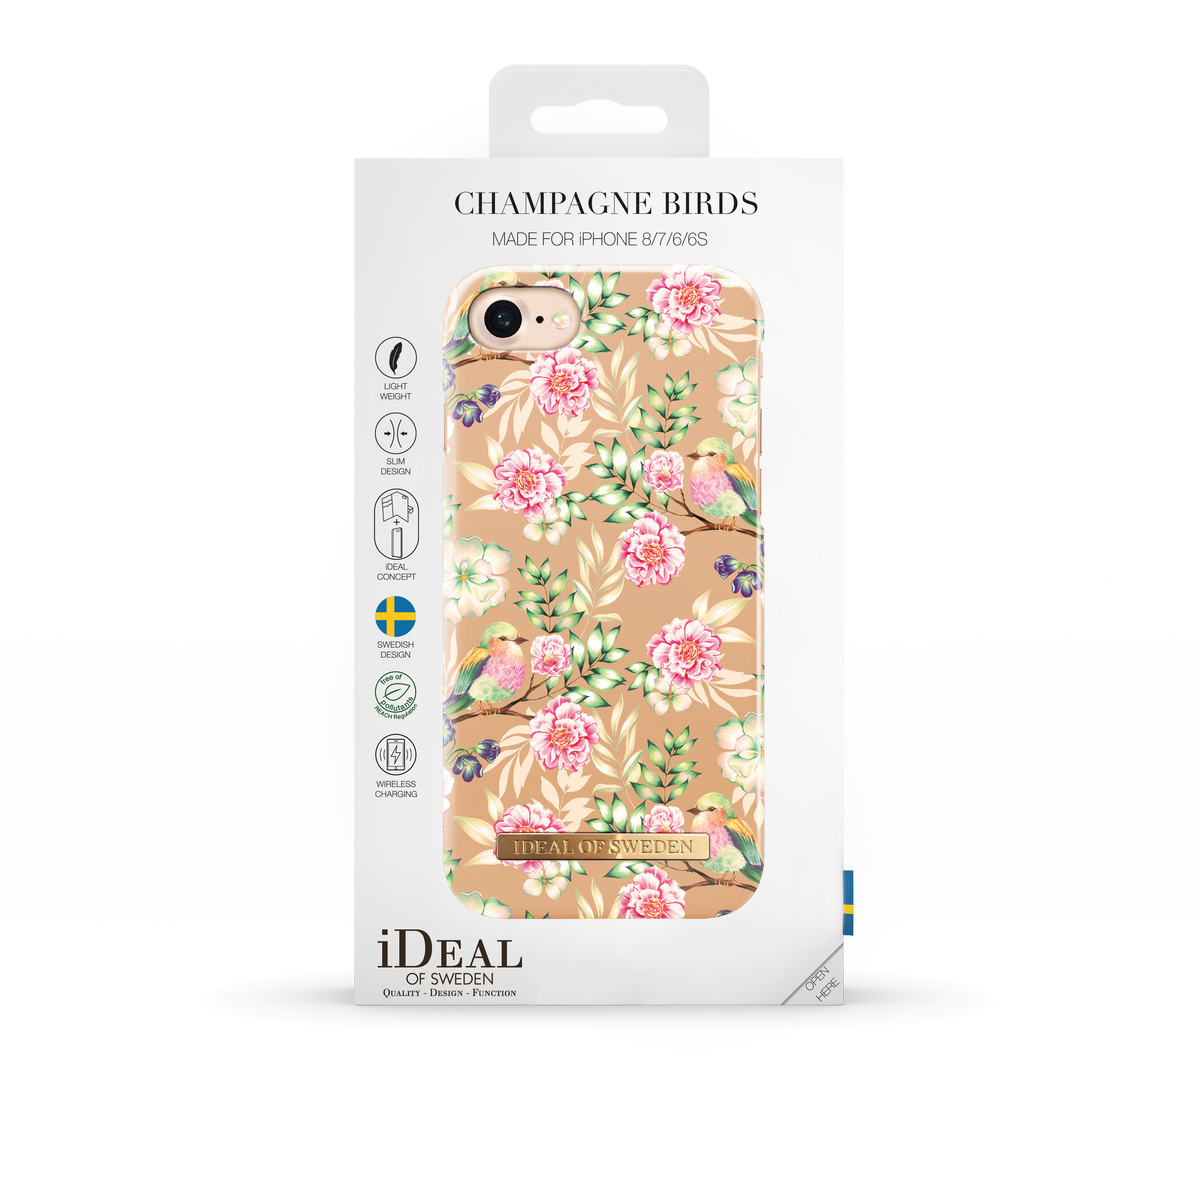 IDEAL OF SWEDEN 8, Backcover, 6, Birds iPhone 7, Fashion, Champagne iPhone Apple, iPhone